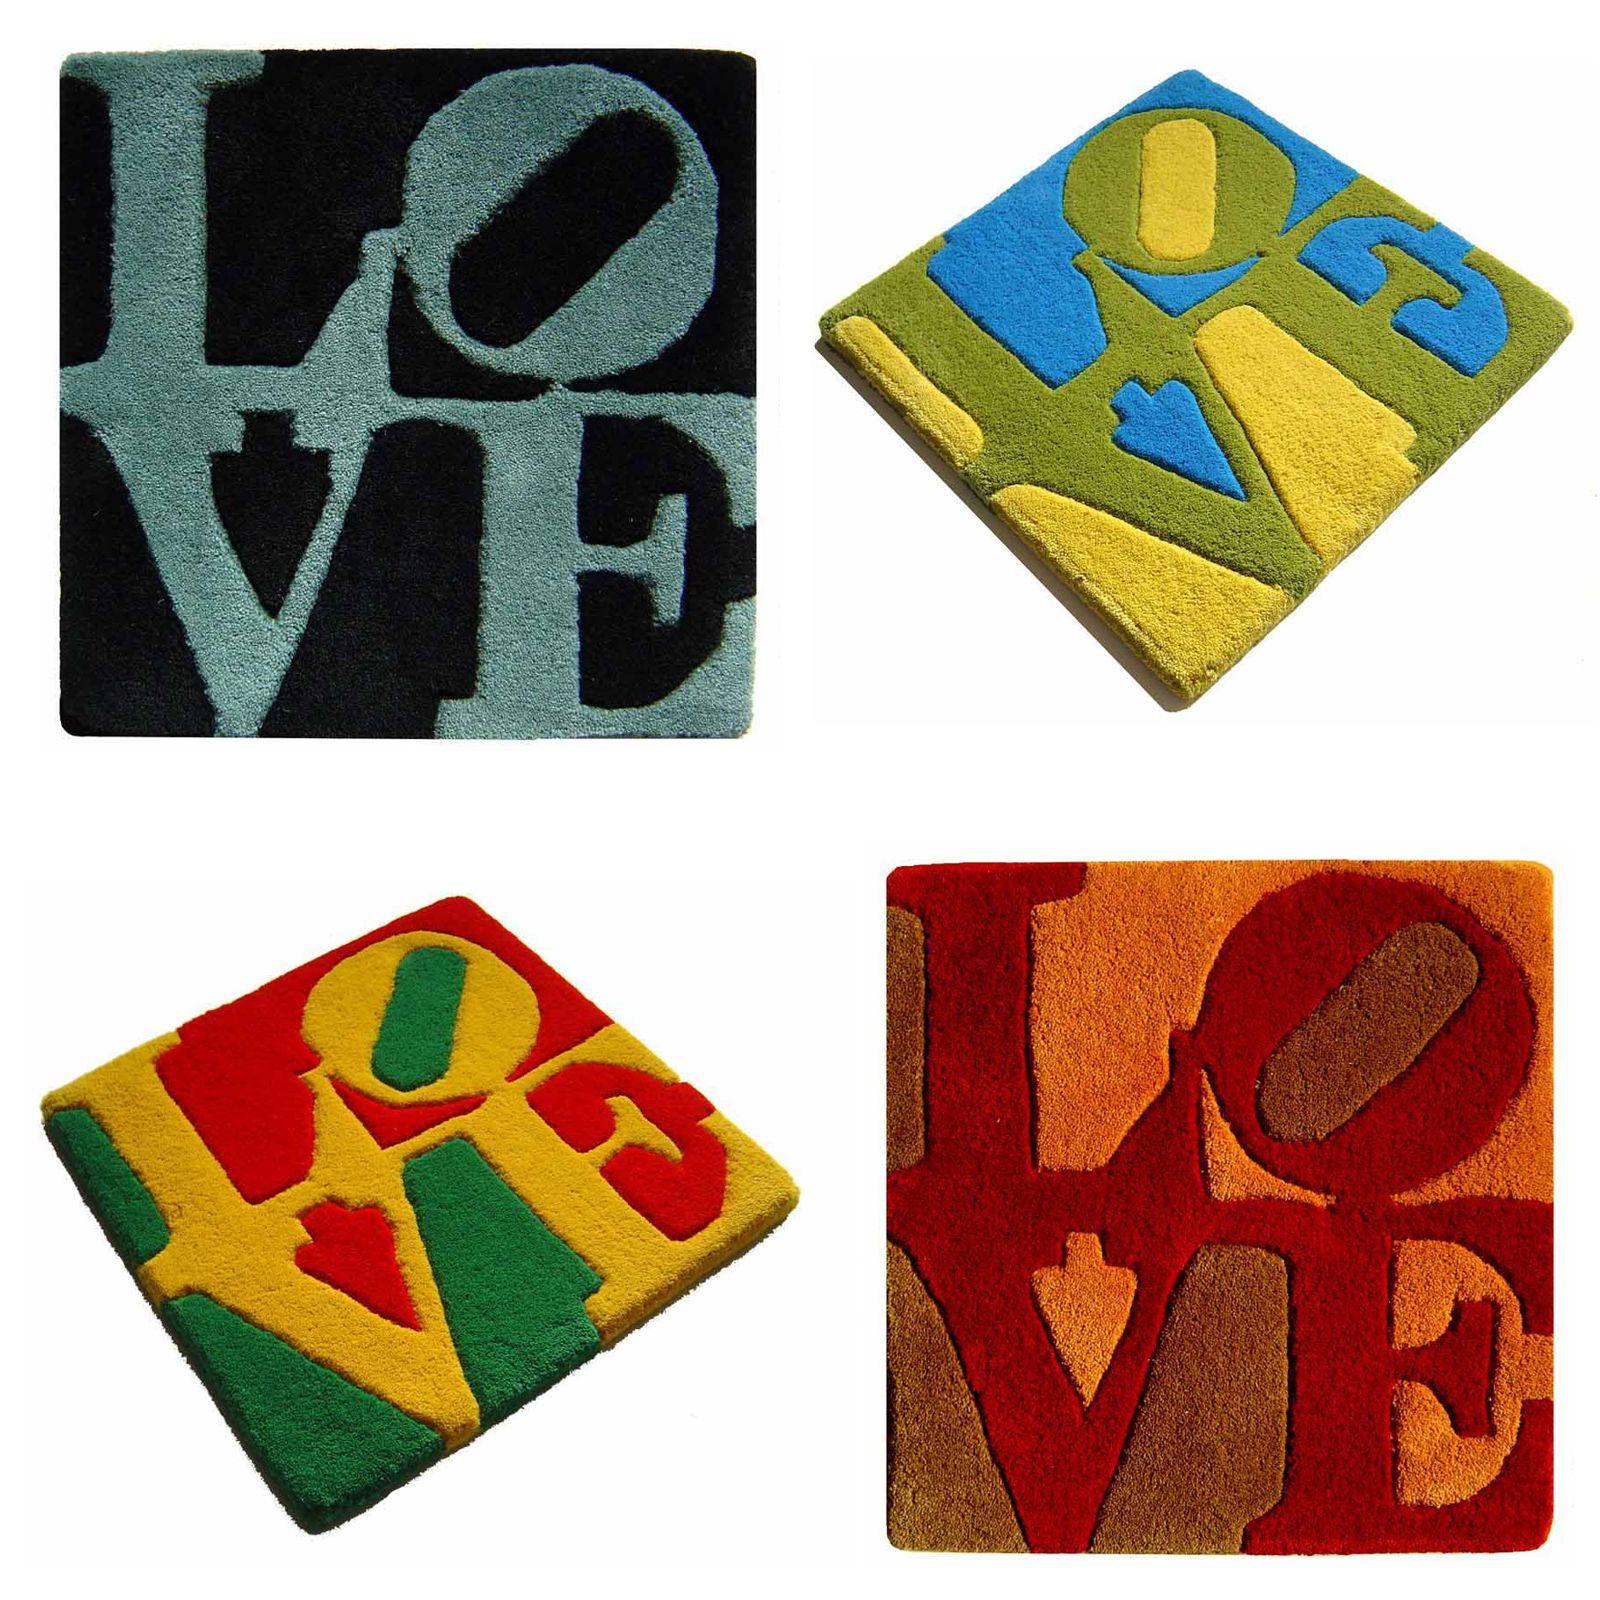 ALL SEASONS LOVE - 4 PIECES - Print by Robert Indiana